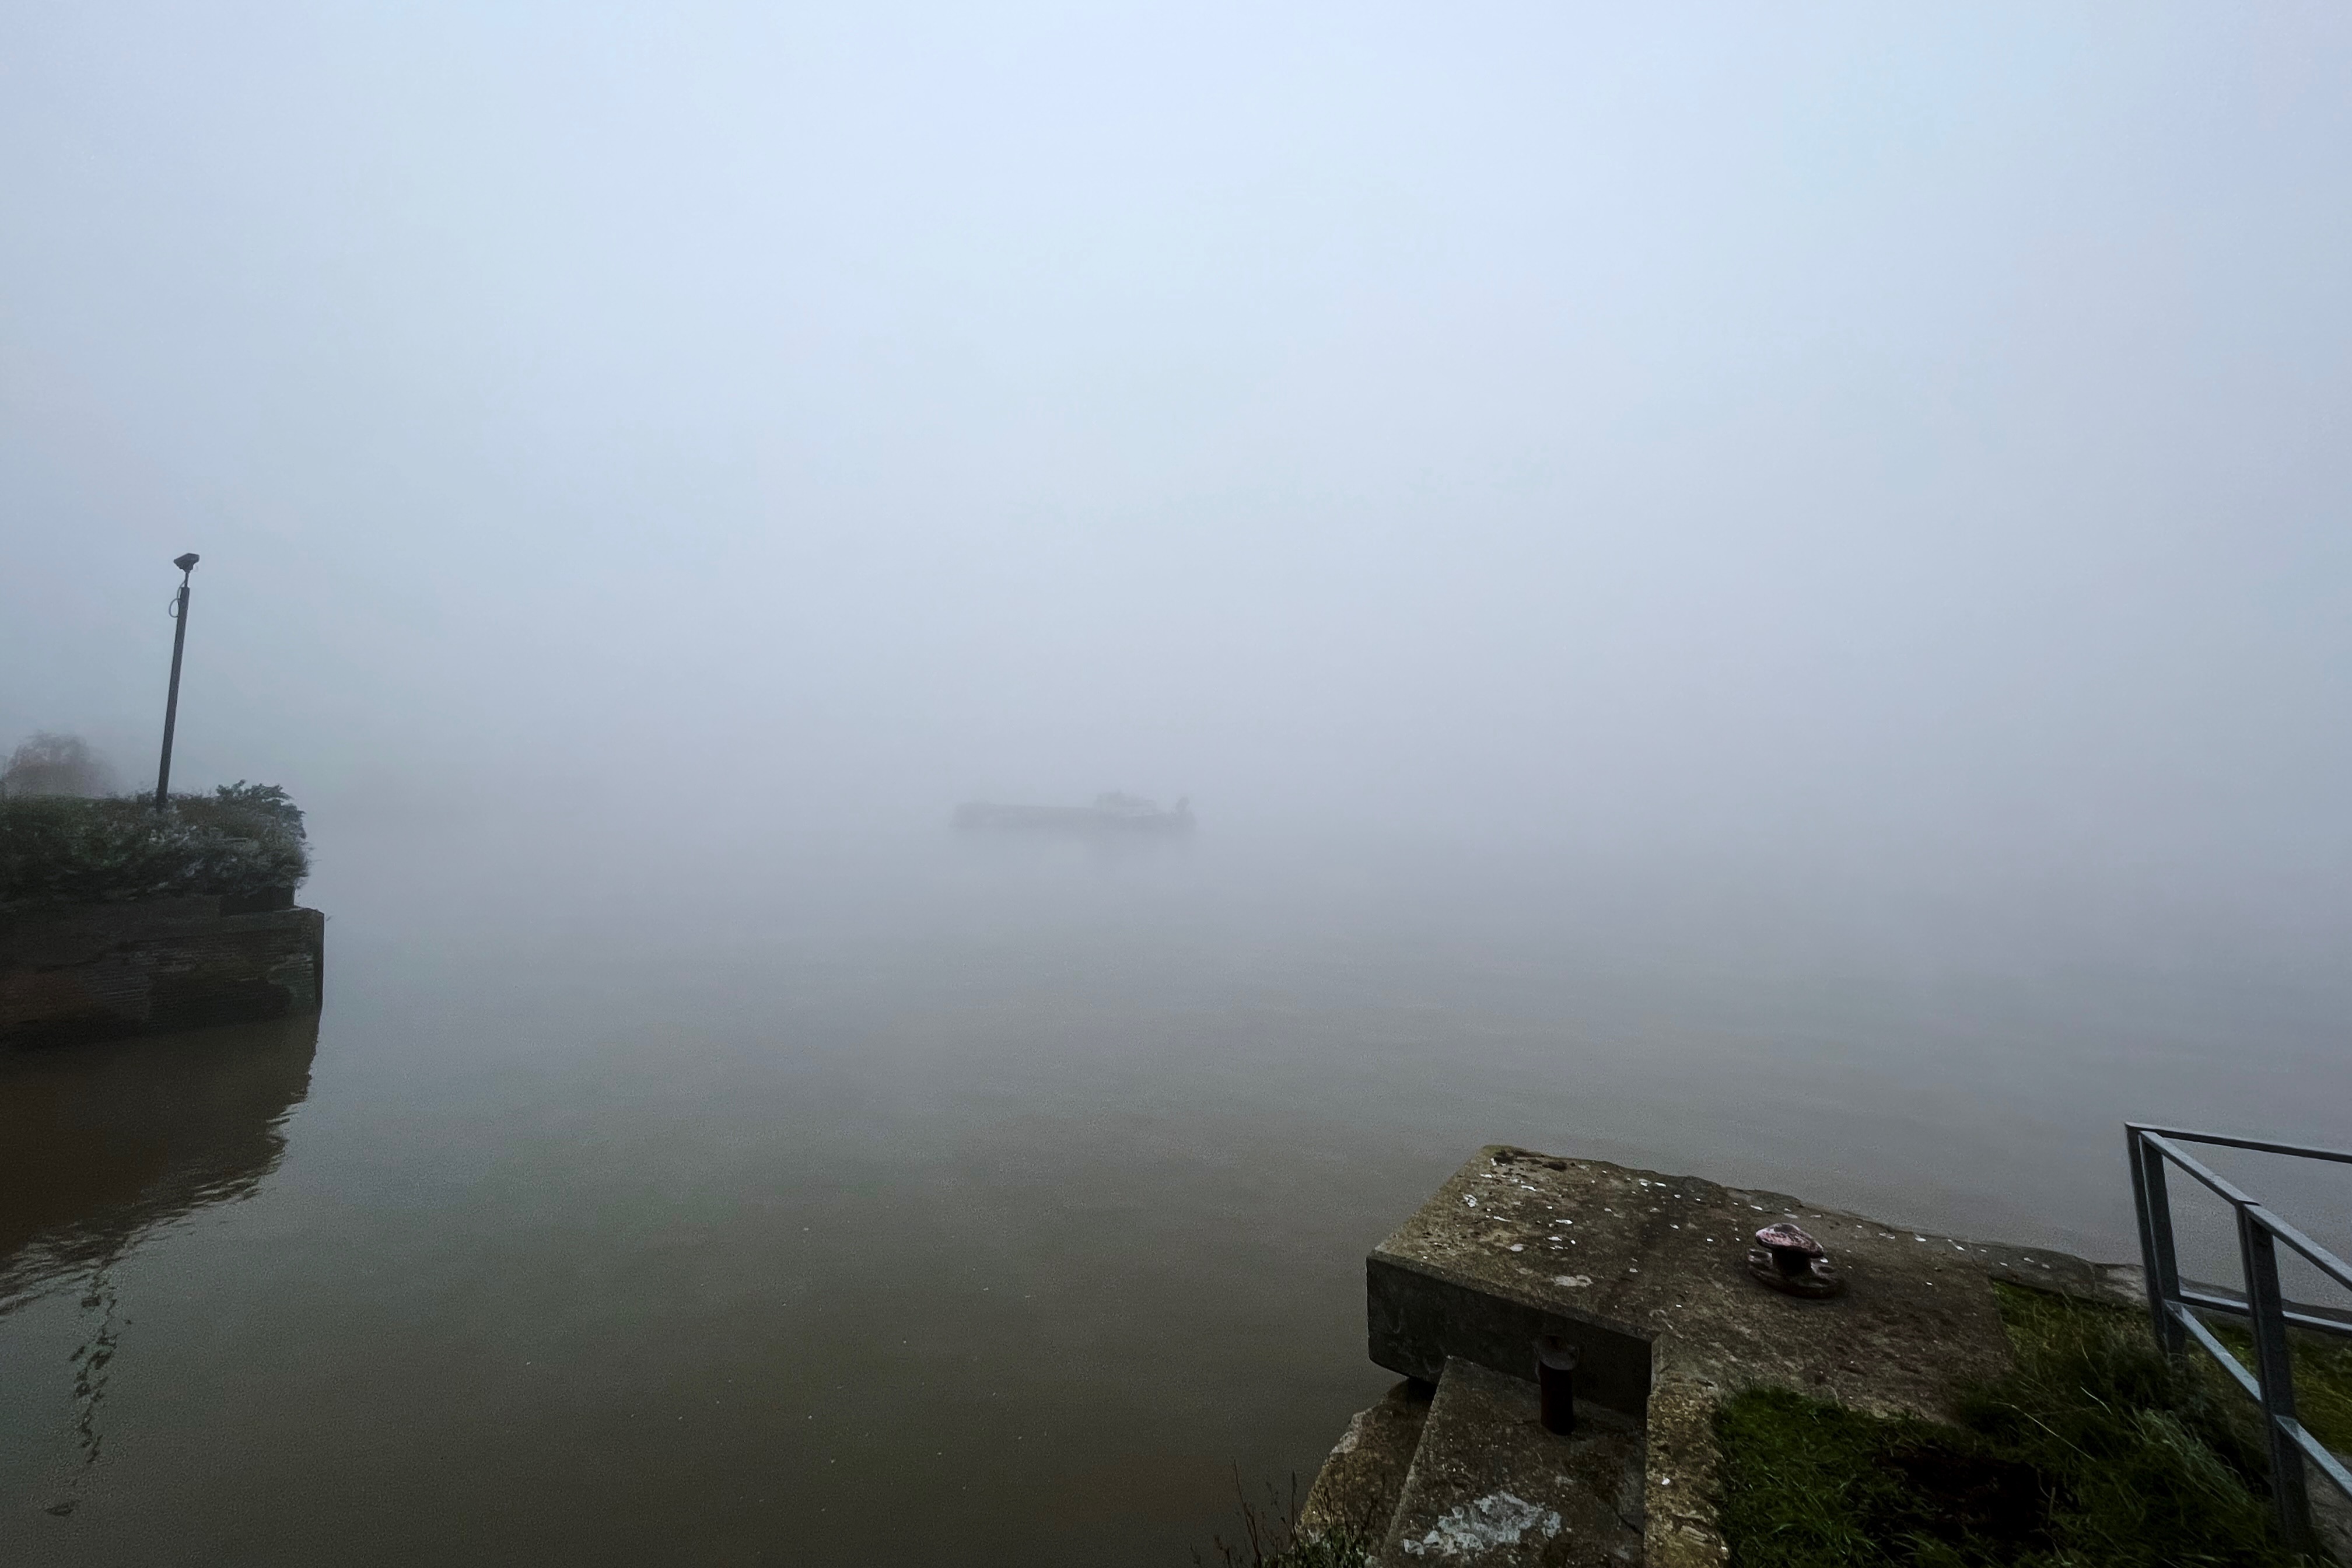 The Thames in the fog showing a barge faintly visible in the middle of the river